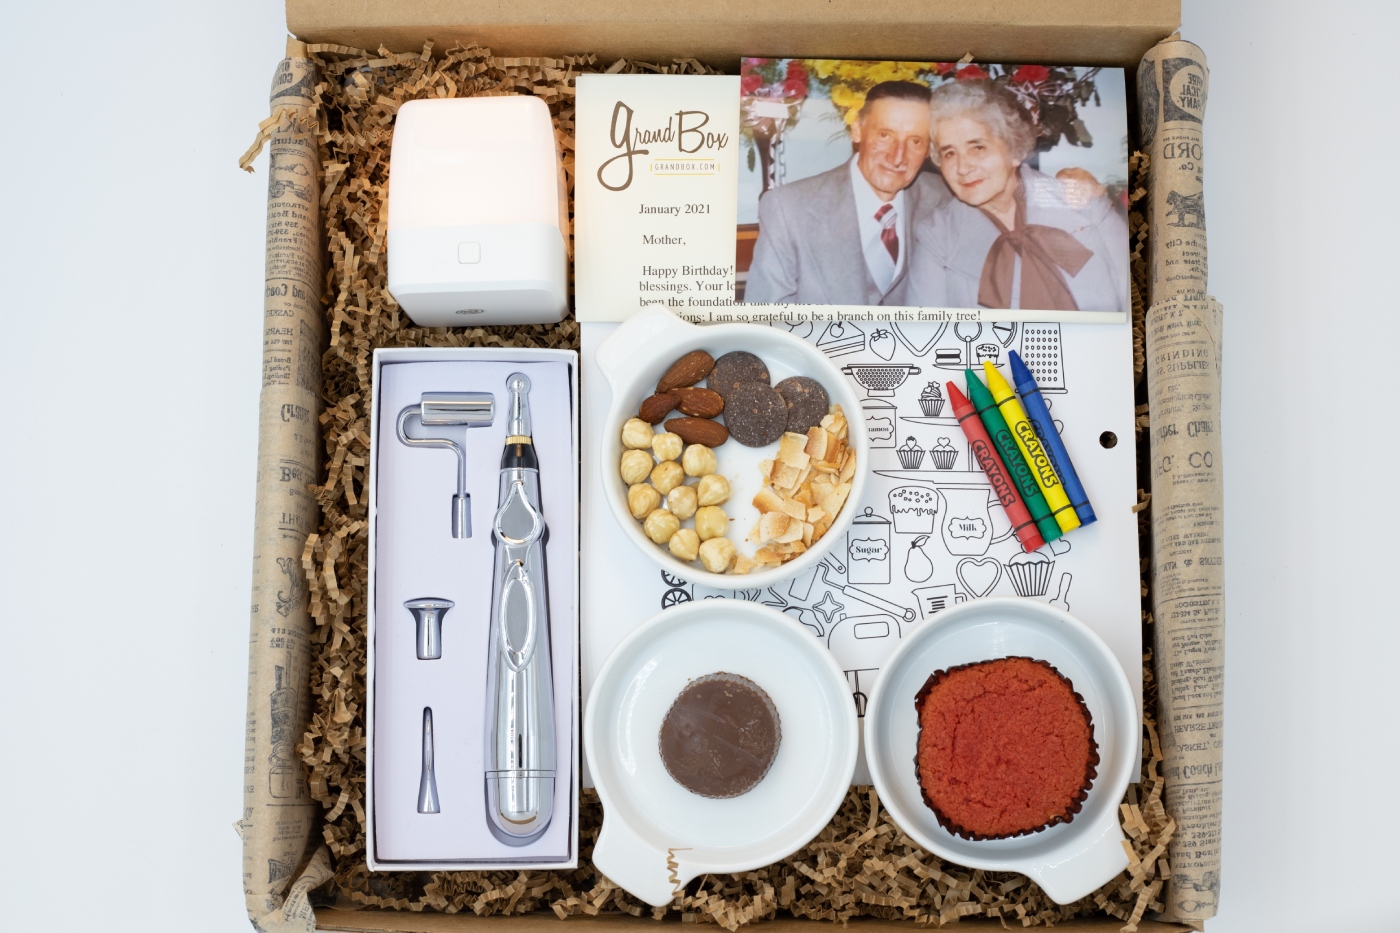 A Grand Smile: Monthly box of luxury gifts, treats and items